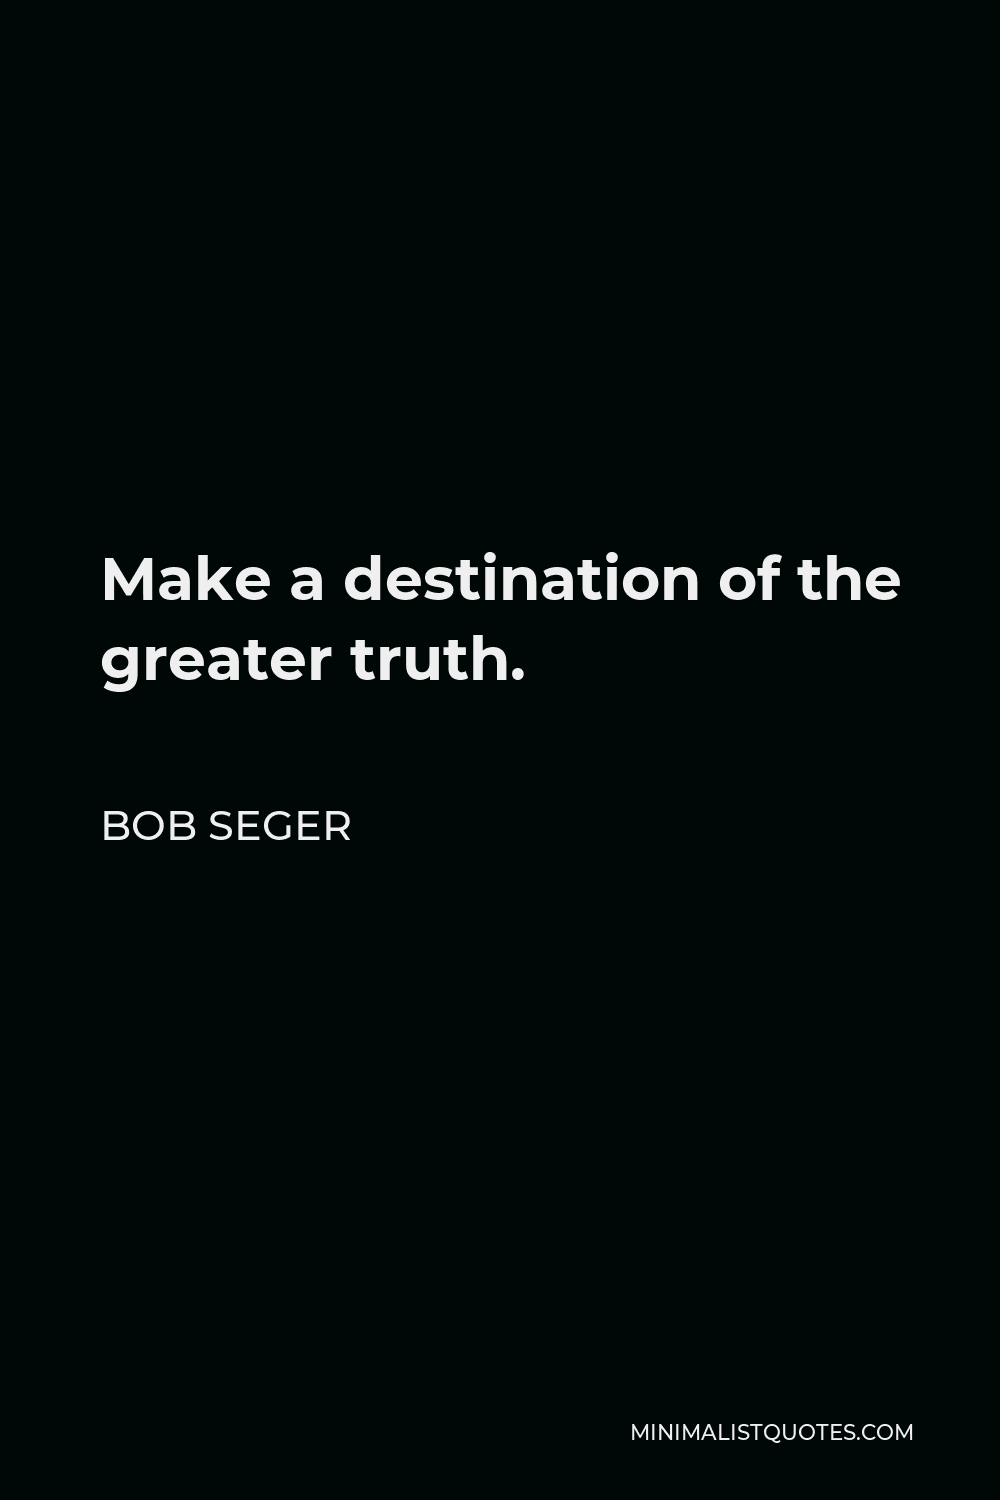 Bob Seger Quote - Make a destination of the greater truth.